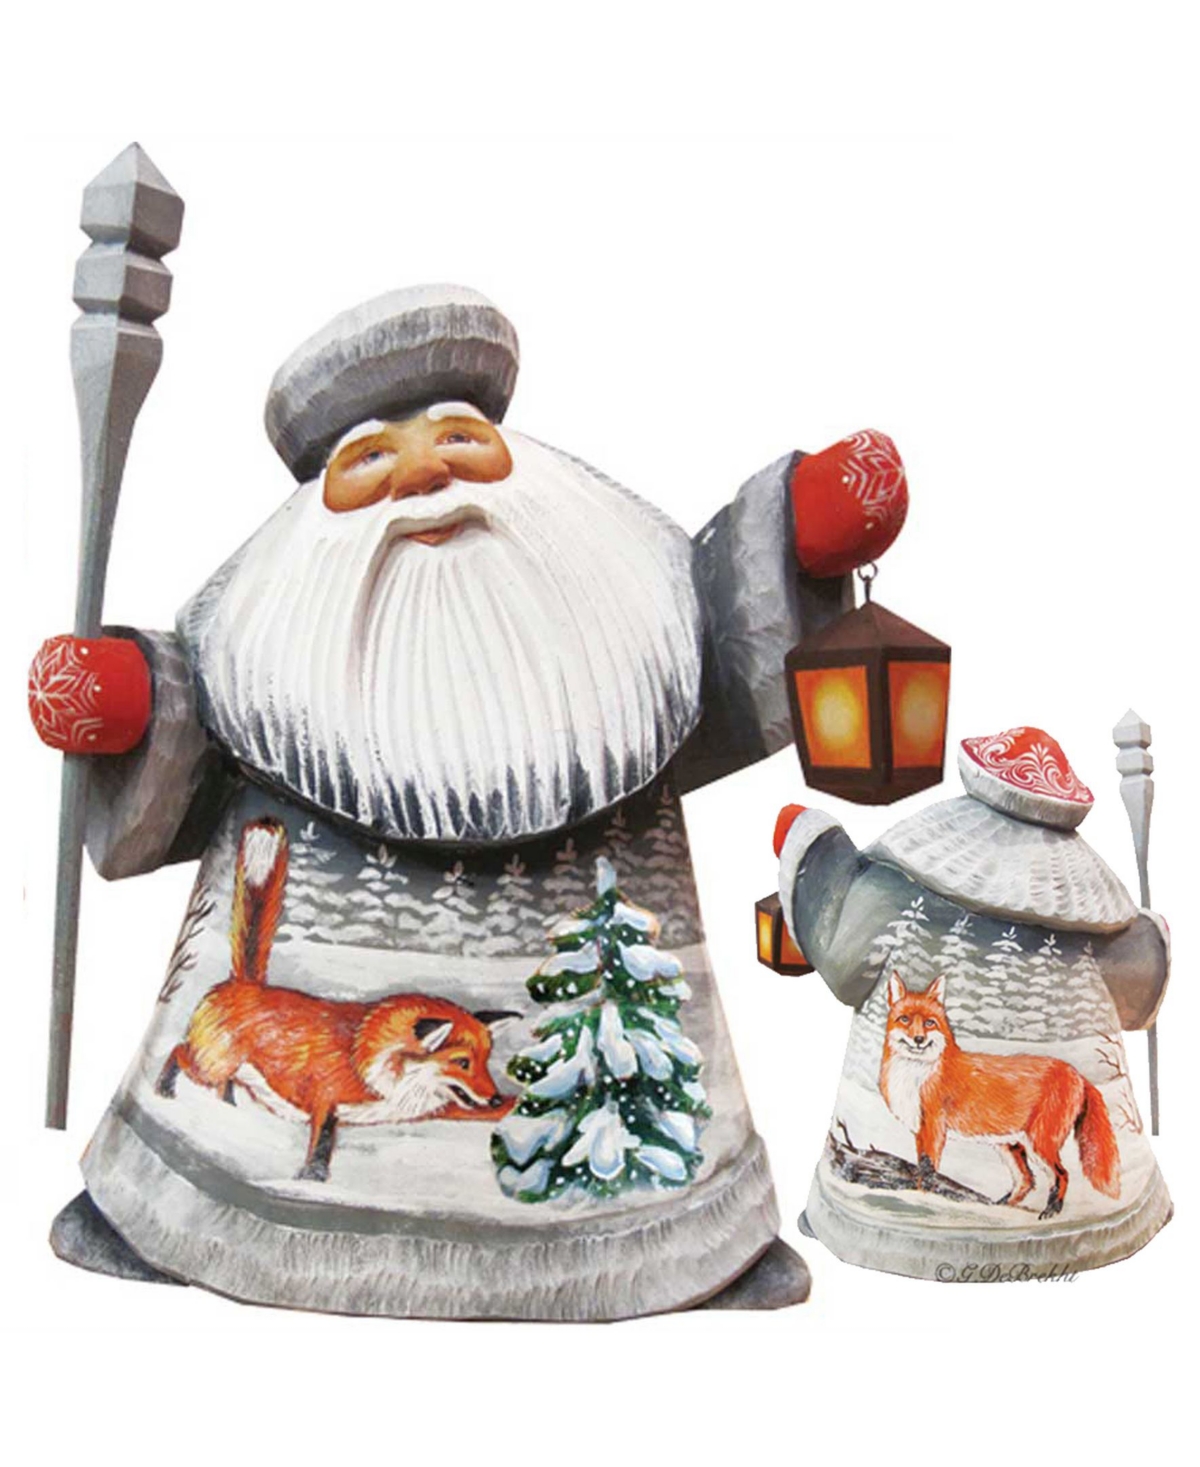 Woodcarved and Hand Painted Santa Foxy Play Father Frost Figurine - Multi